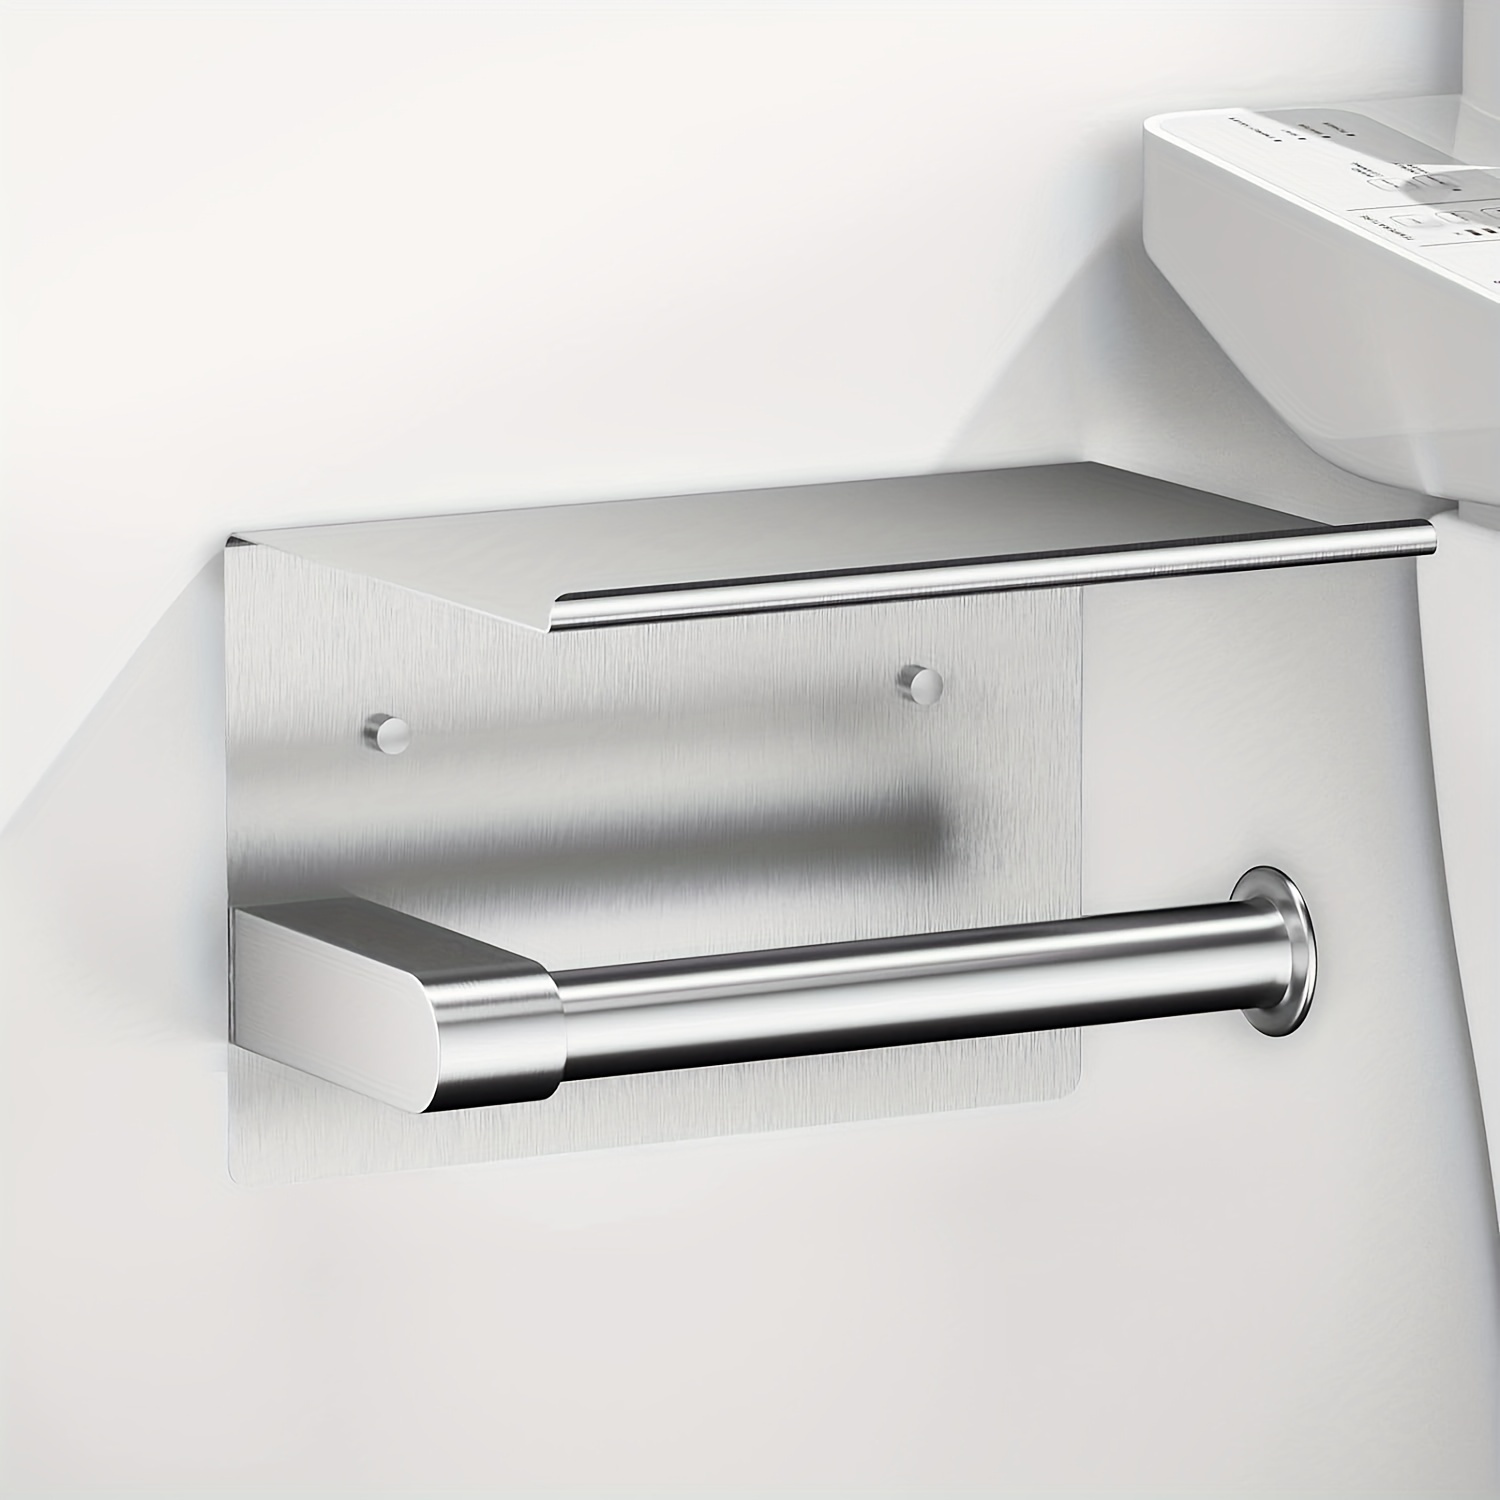 

Stainless Steel Toilet Paper Holder With Shelf - Wall Mount Or Adhesive, Bathroom Tissue Rack For Towels & Accessories